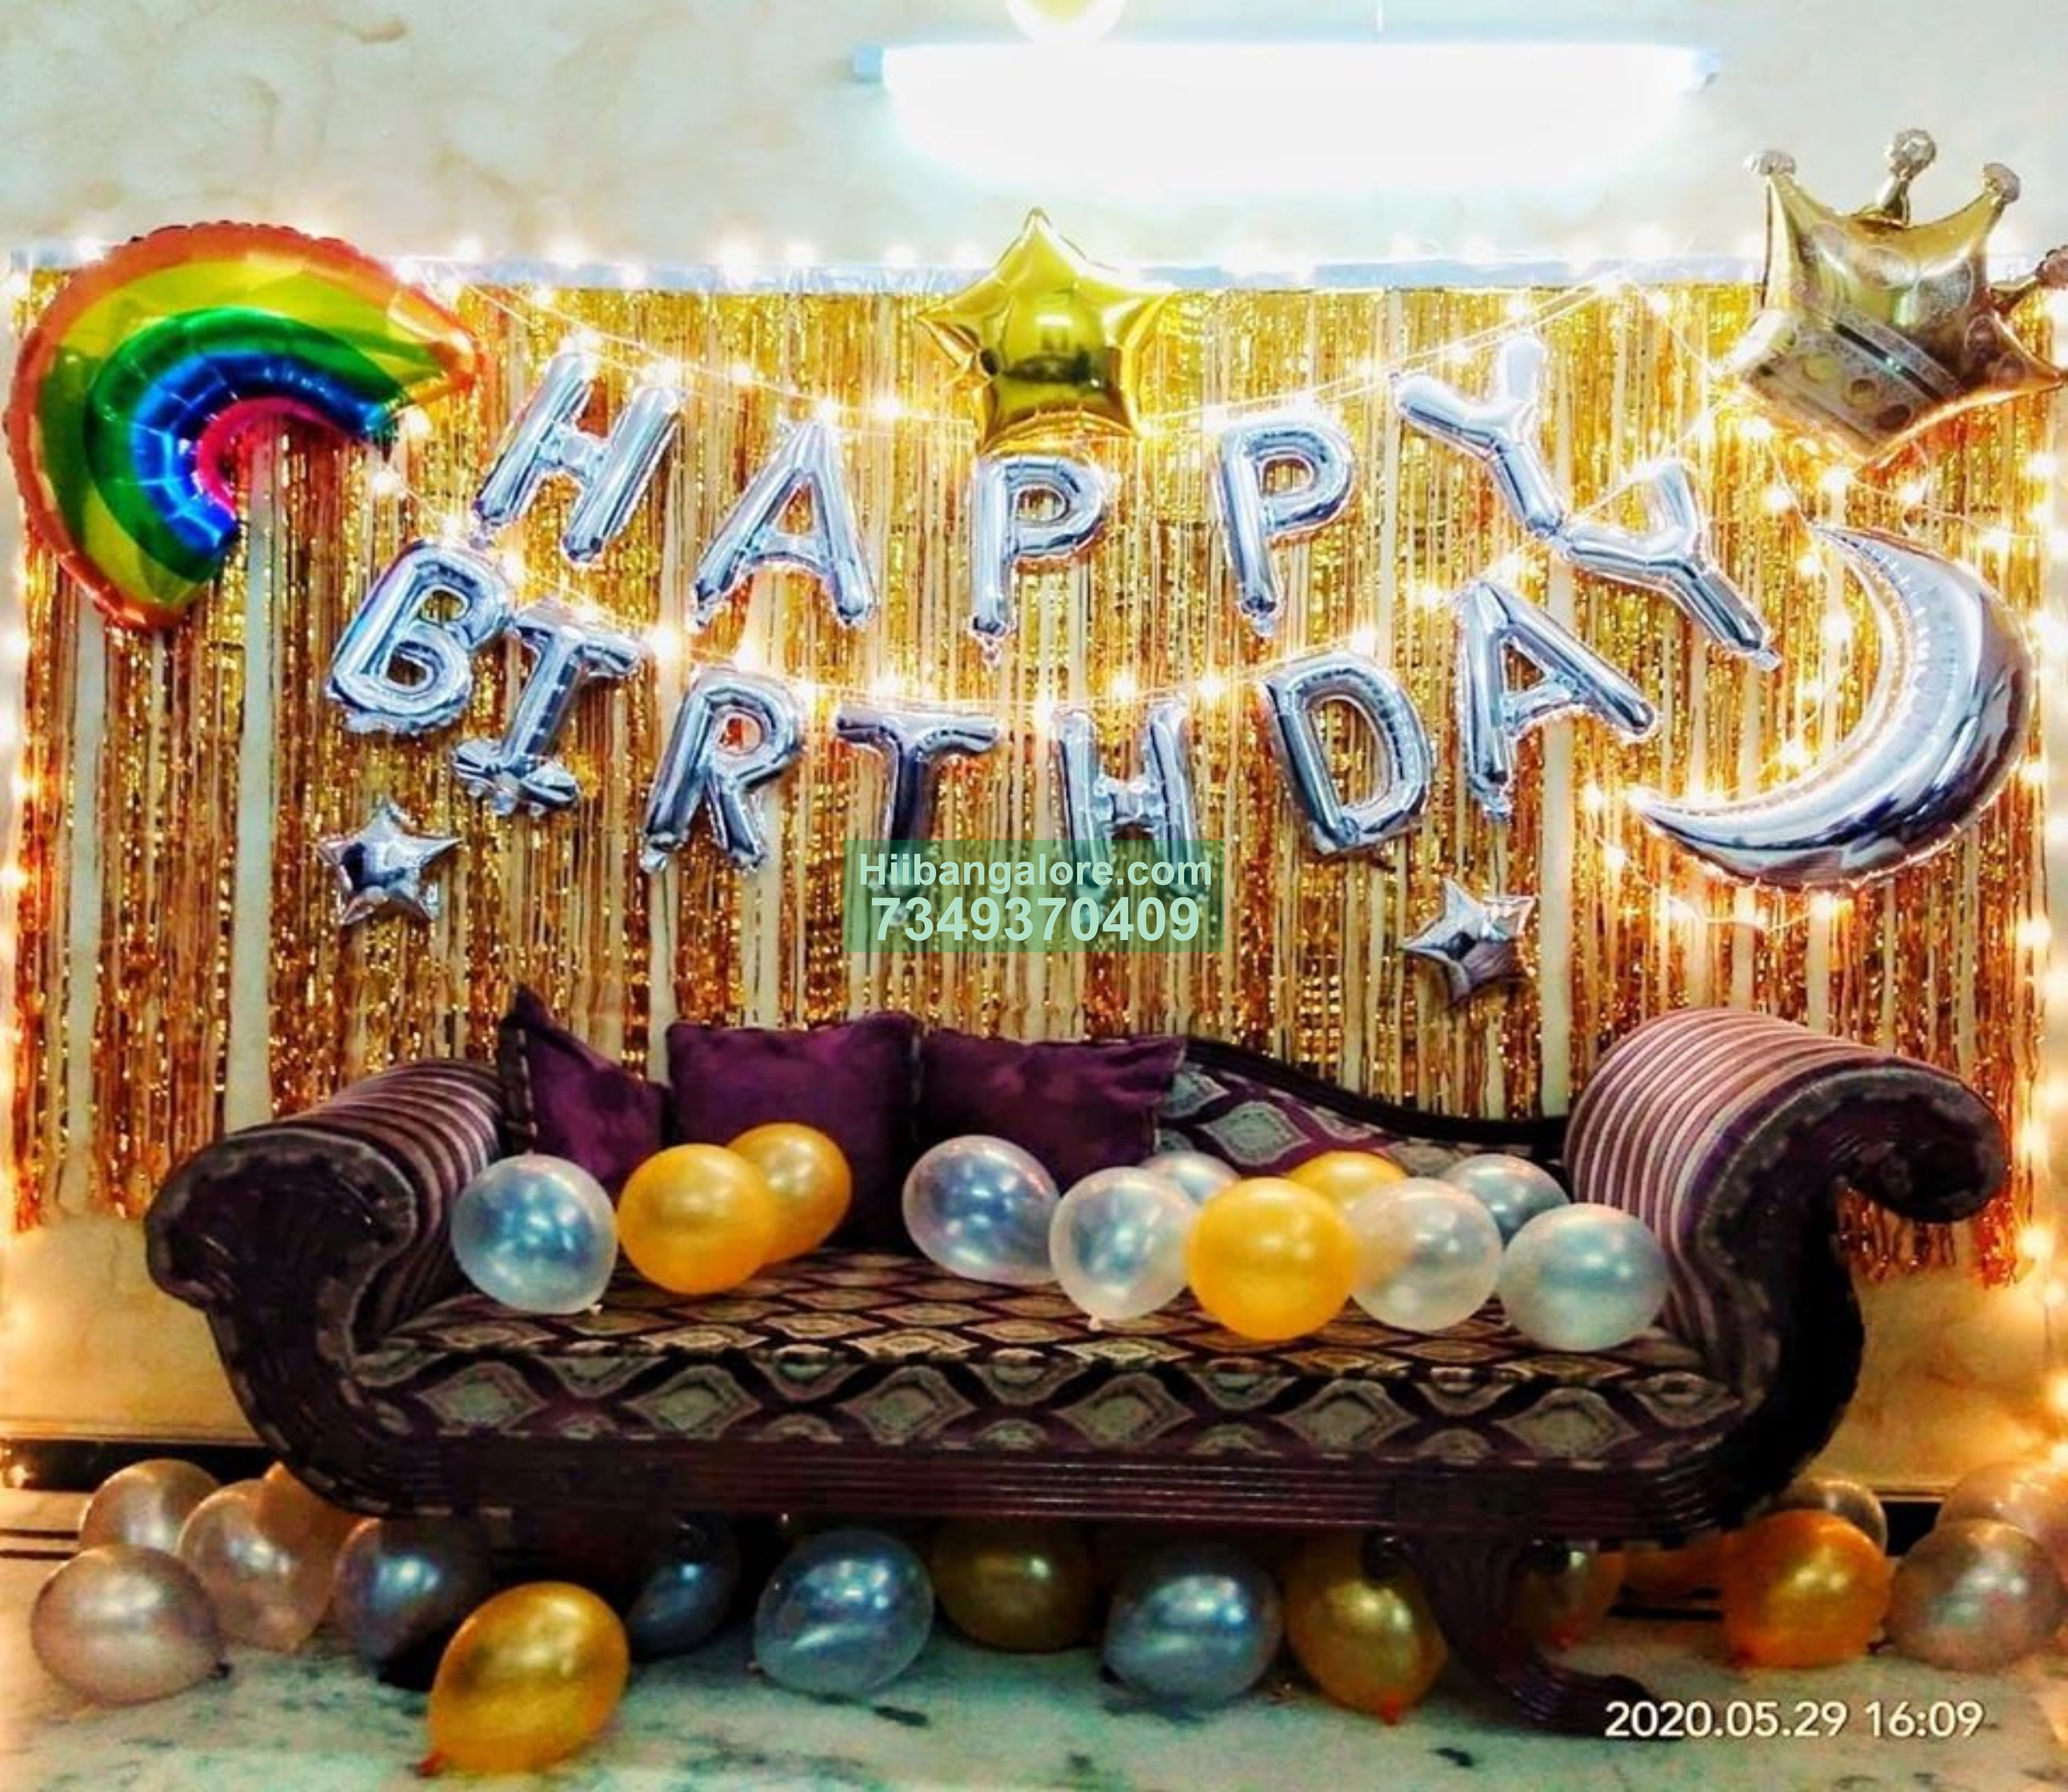 home-balloon-decorations-best-birthday-party-organisers-balloon